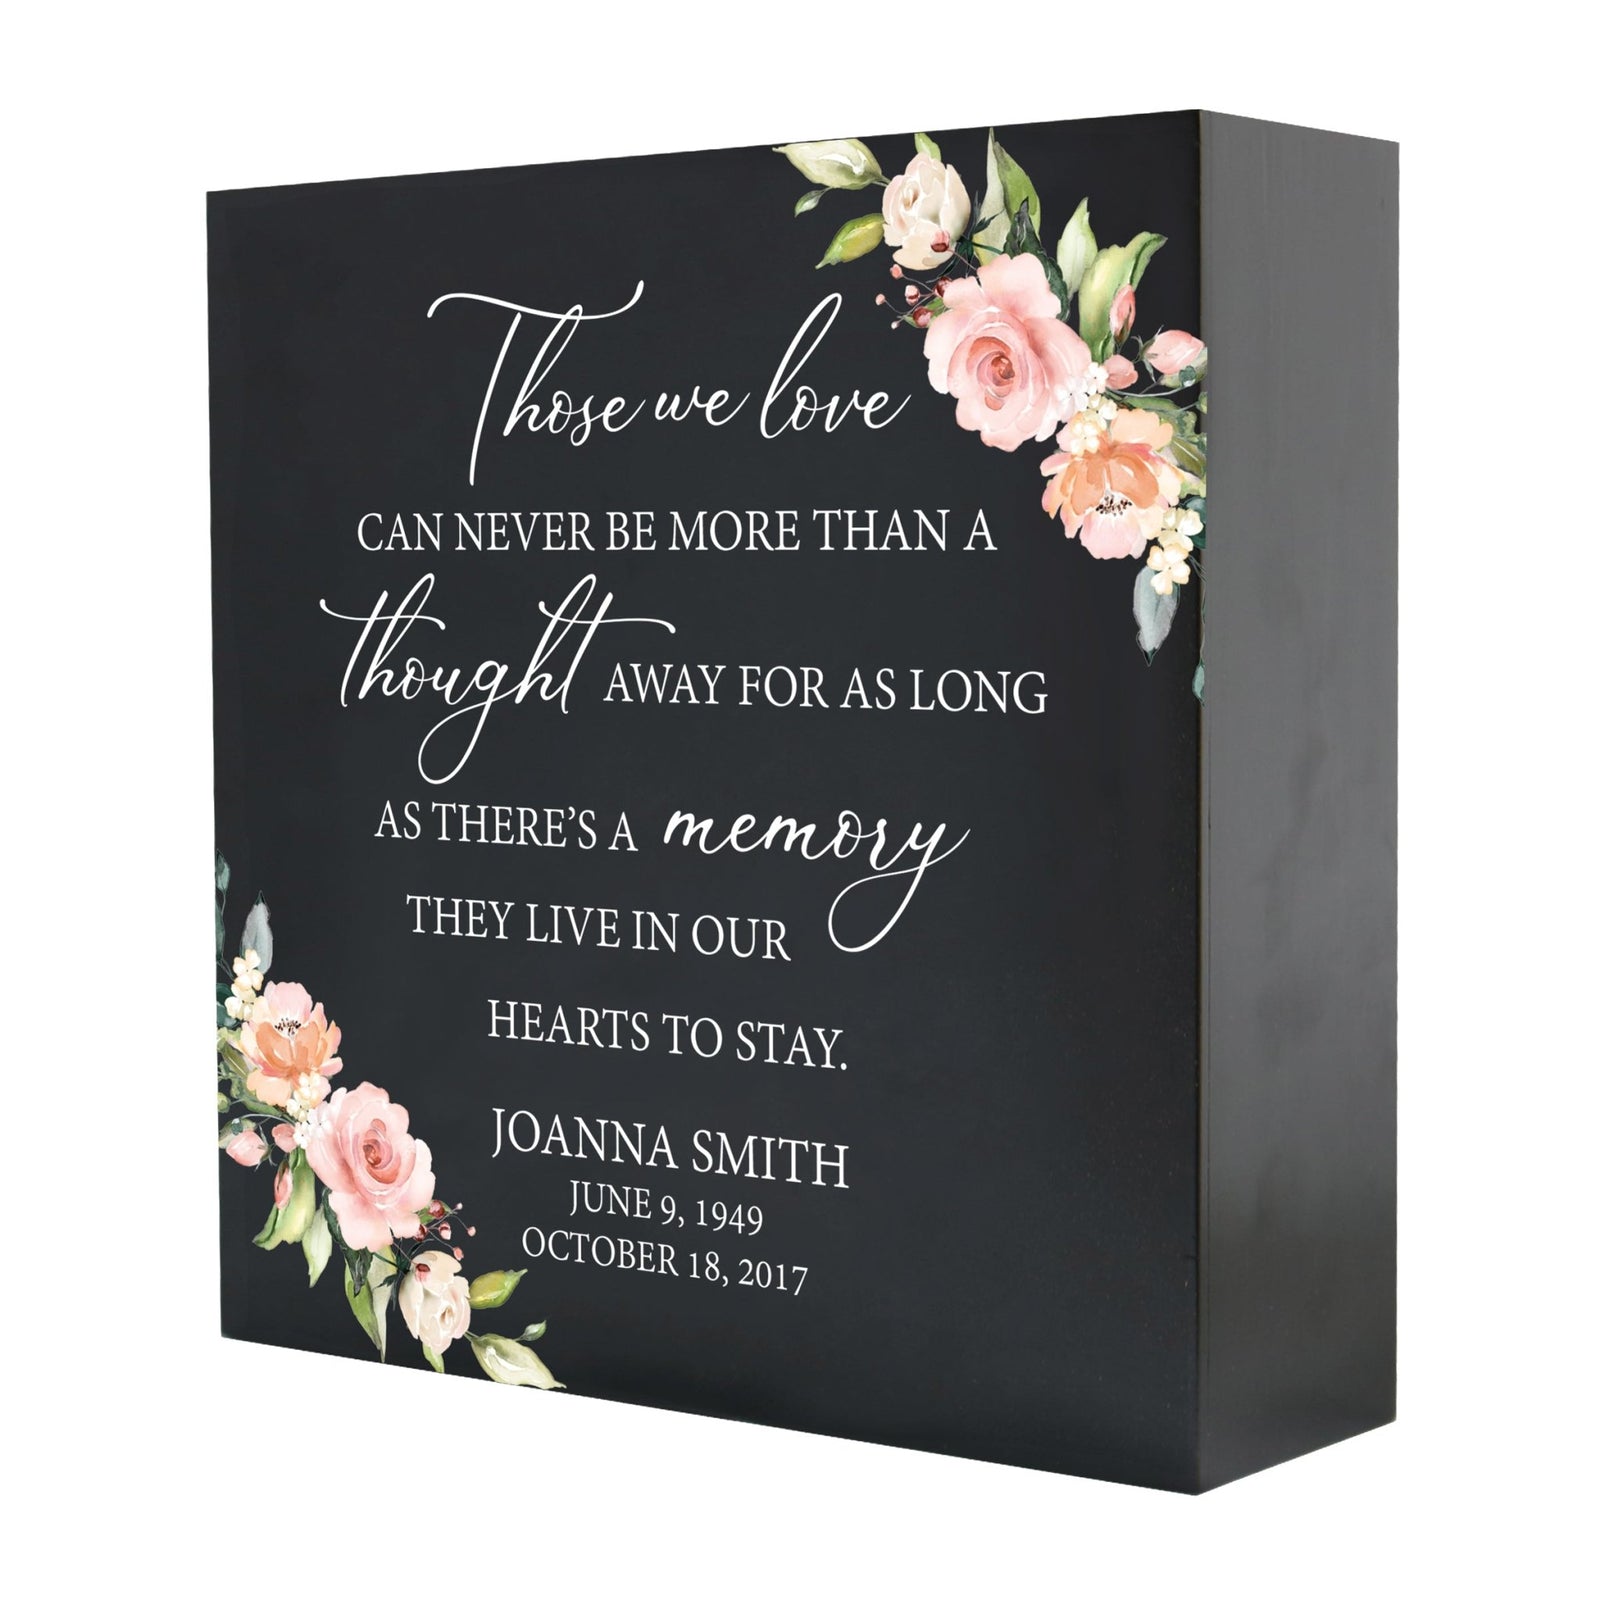 Personalized Modern Inspirational Memorial Wooden Shadow Box and Urn 10x10 holds 189 cu in of Human Ashes - Those We Love Can Never (Black) - LifeSong Milestones